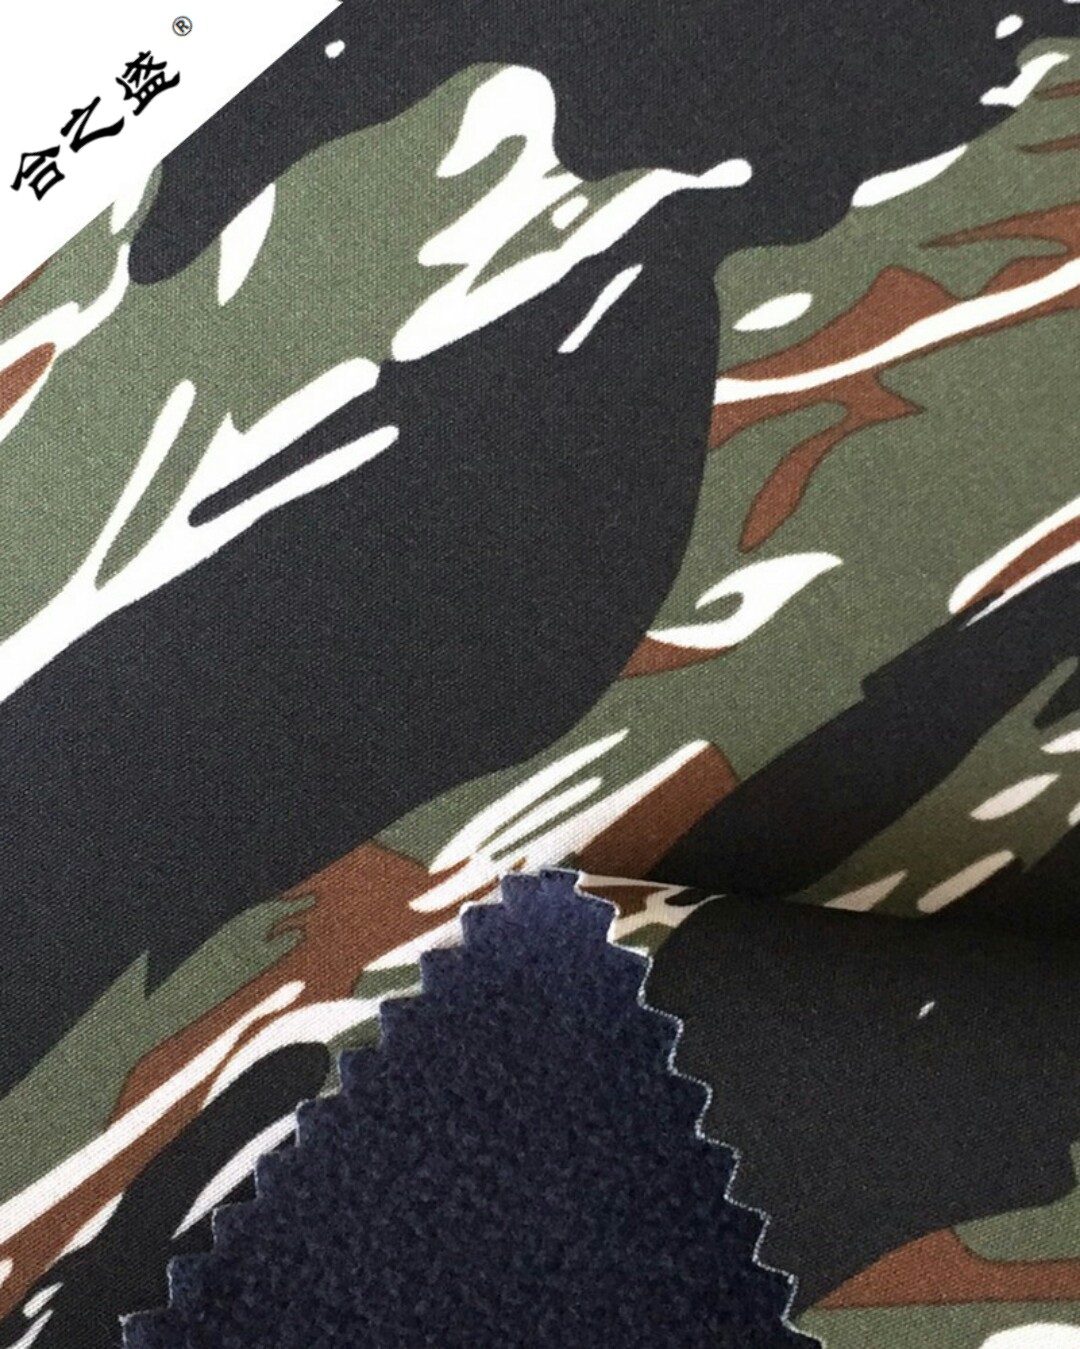 camouflage softshell fabric lamination for army wear